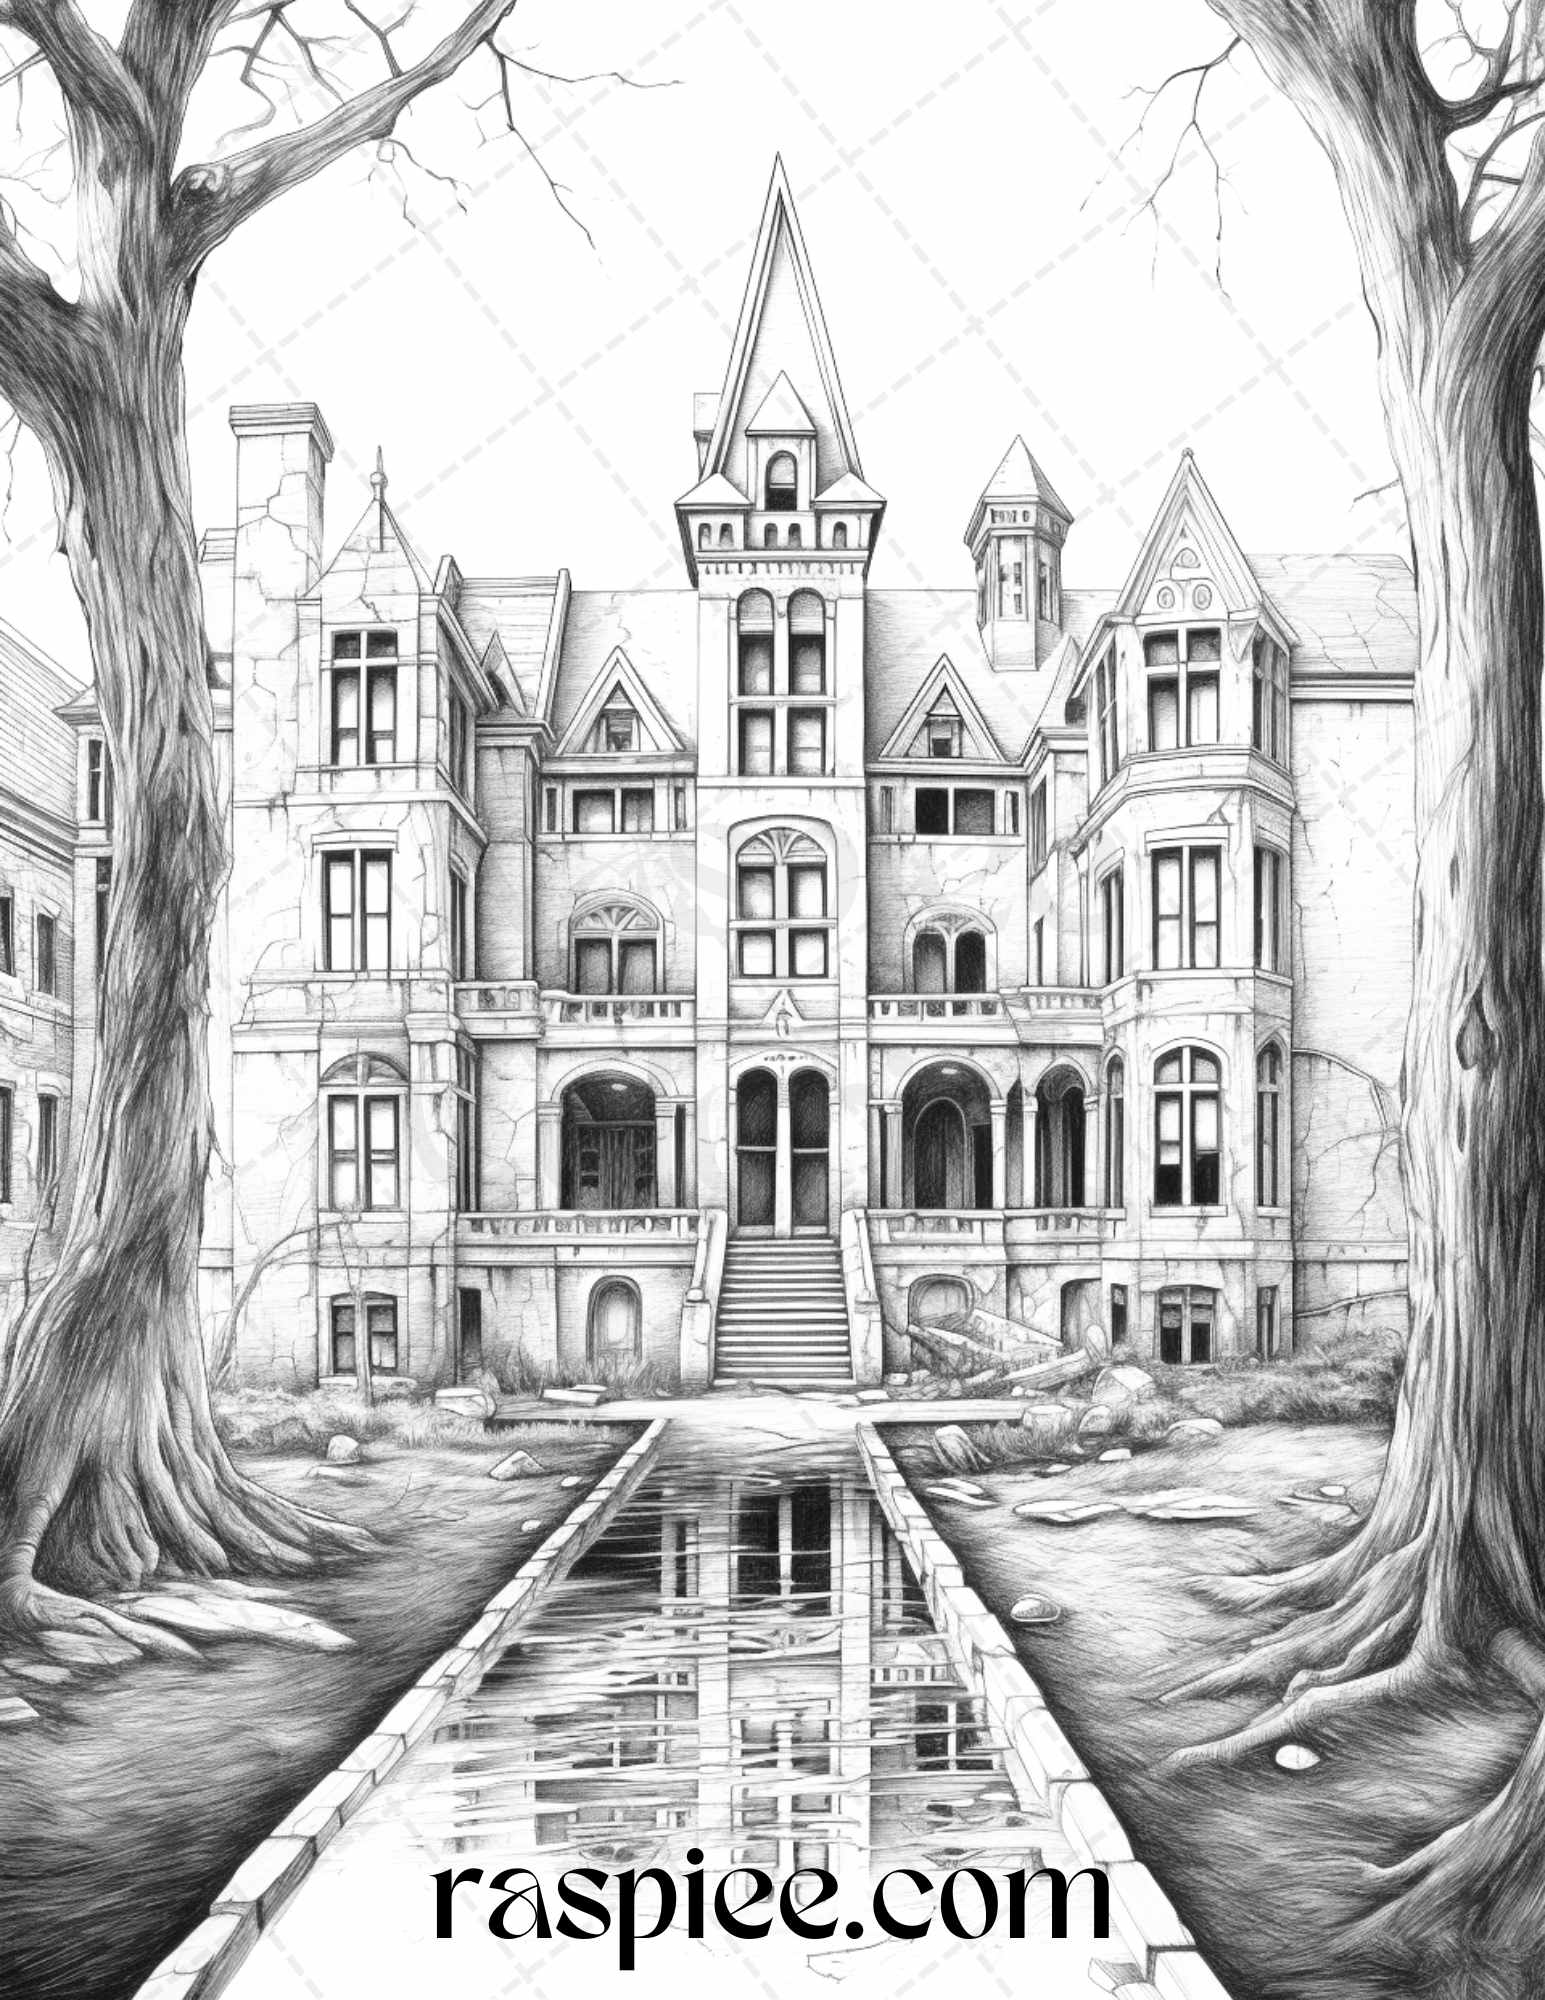 Halloween Grayscale Coloring Pages for Adults, Ghoulish Coloring Sheets Instant Download, Spooky Adult Coloring Printable, Macabre Coloring Patterns Instant Download, Creepy Halloween Coloring Relaxation, Horror-Themed Adult Coloring Pages, Grayscale Coloring Craft for October